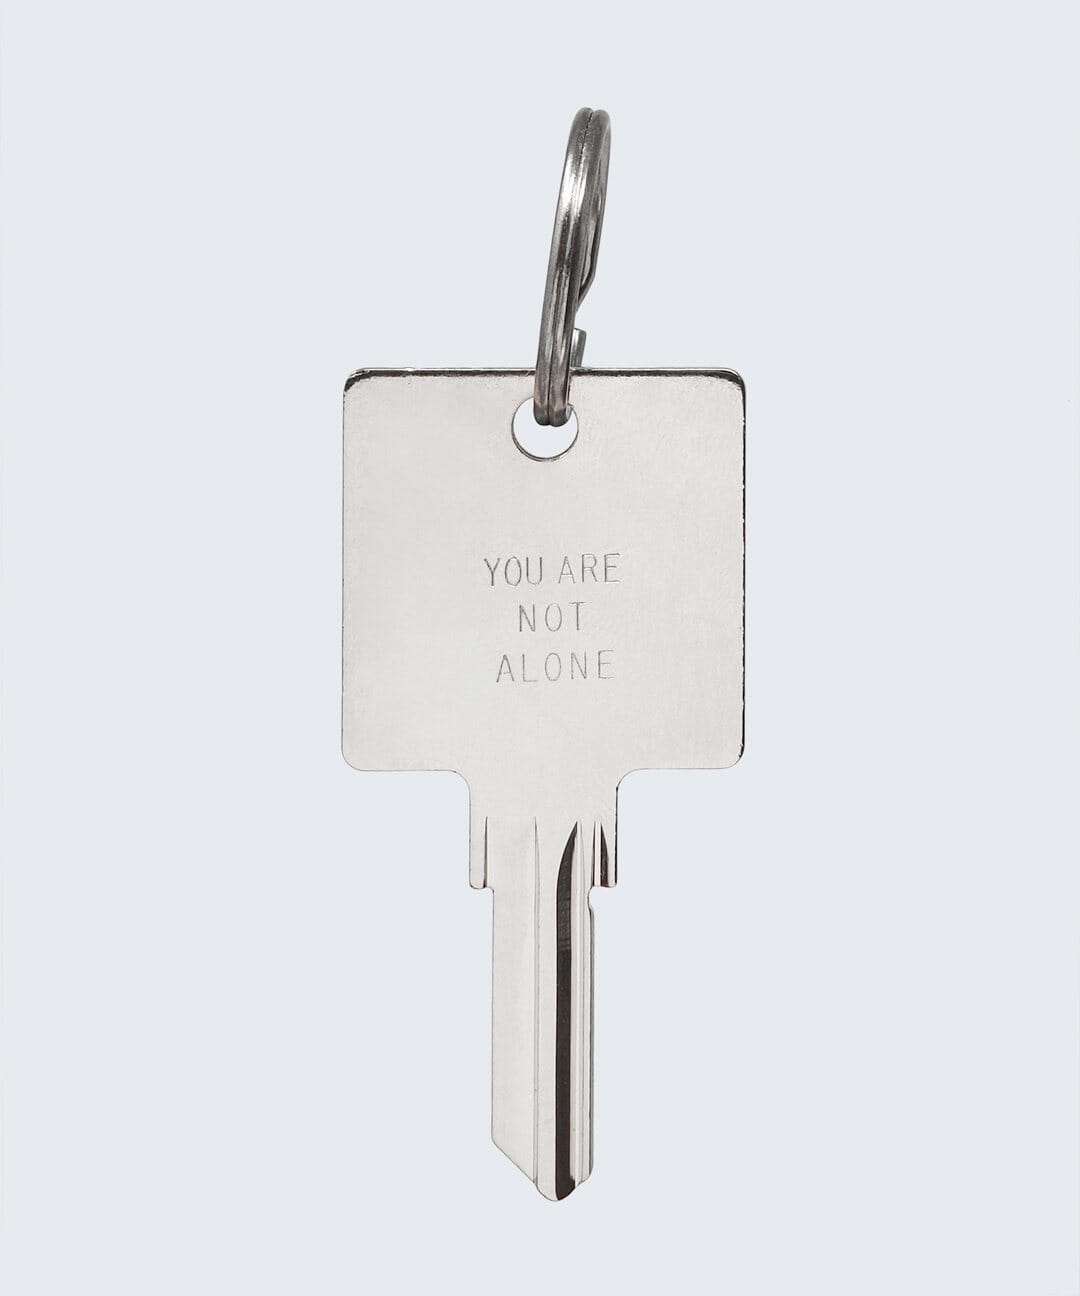 N - YOU ARE NOT ALONE Keychain Key Chain The Giving Keys YOU ARE NOT ALONE SILVER 